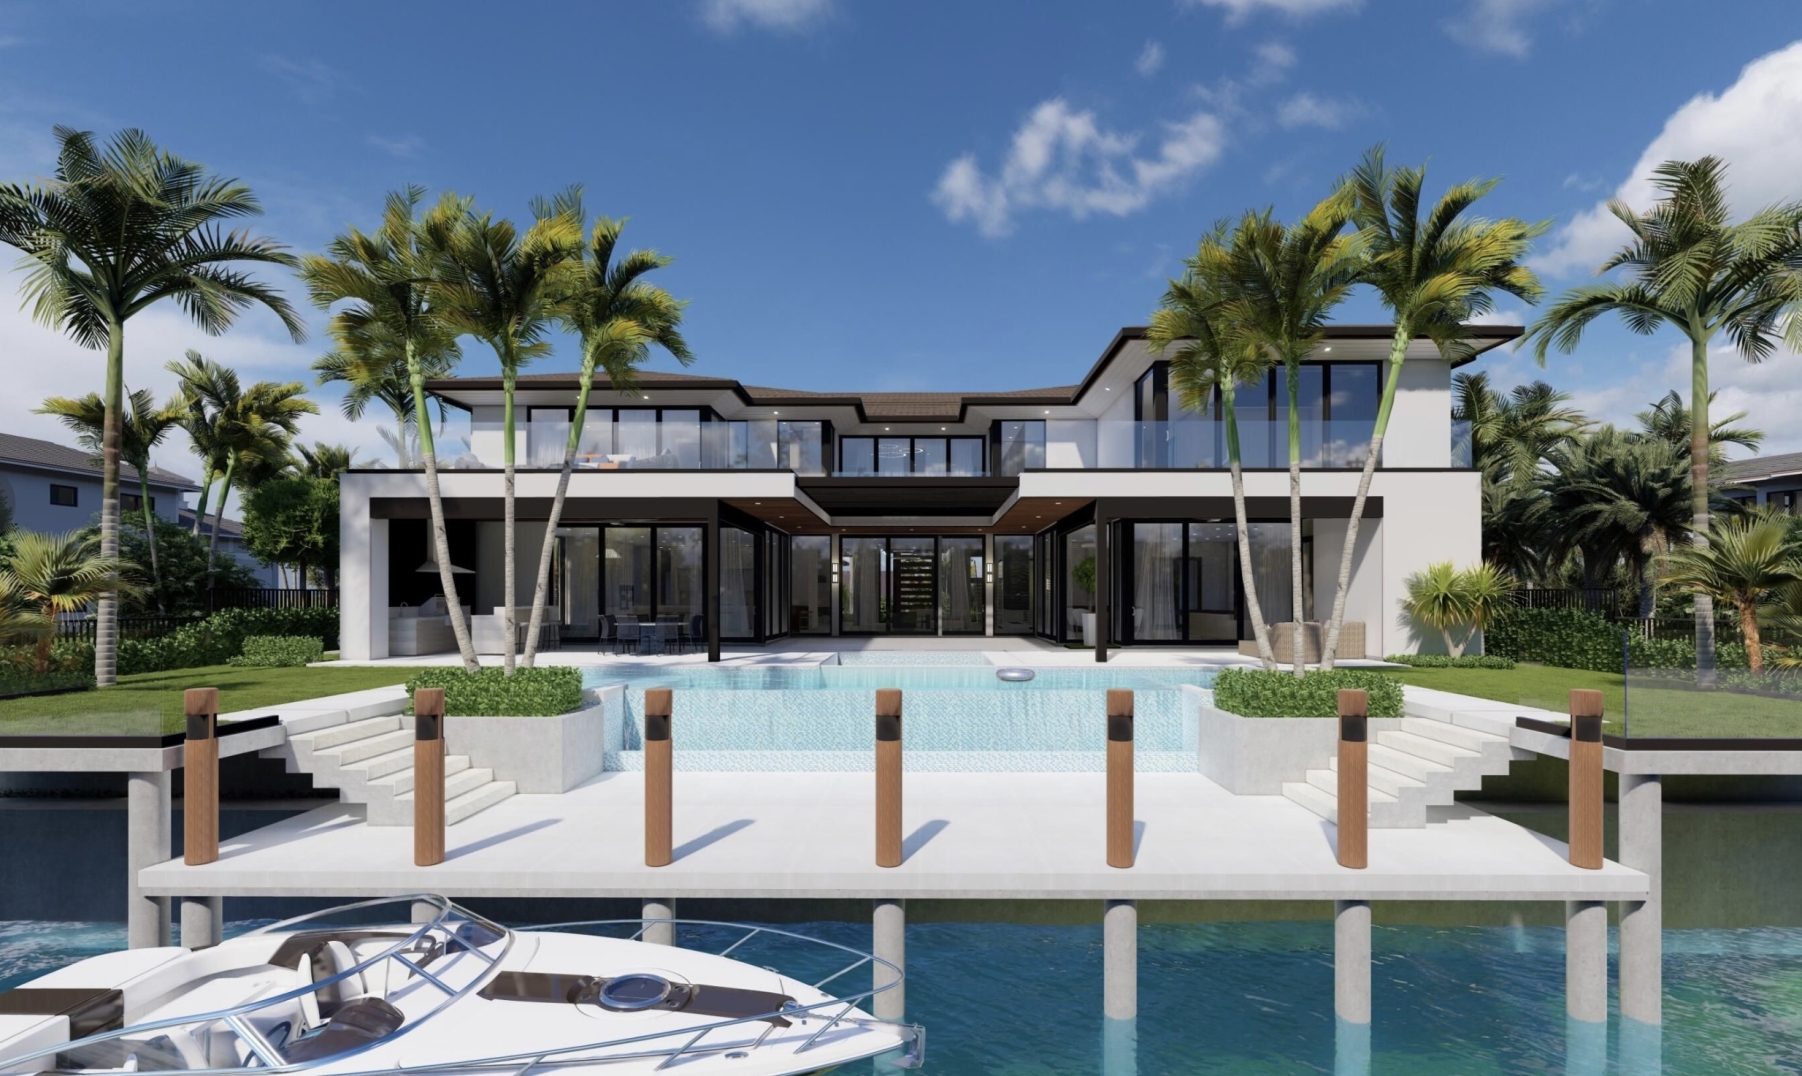 Ocean Access Homes in Pompano Beach with no Fixed Bridges